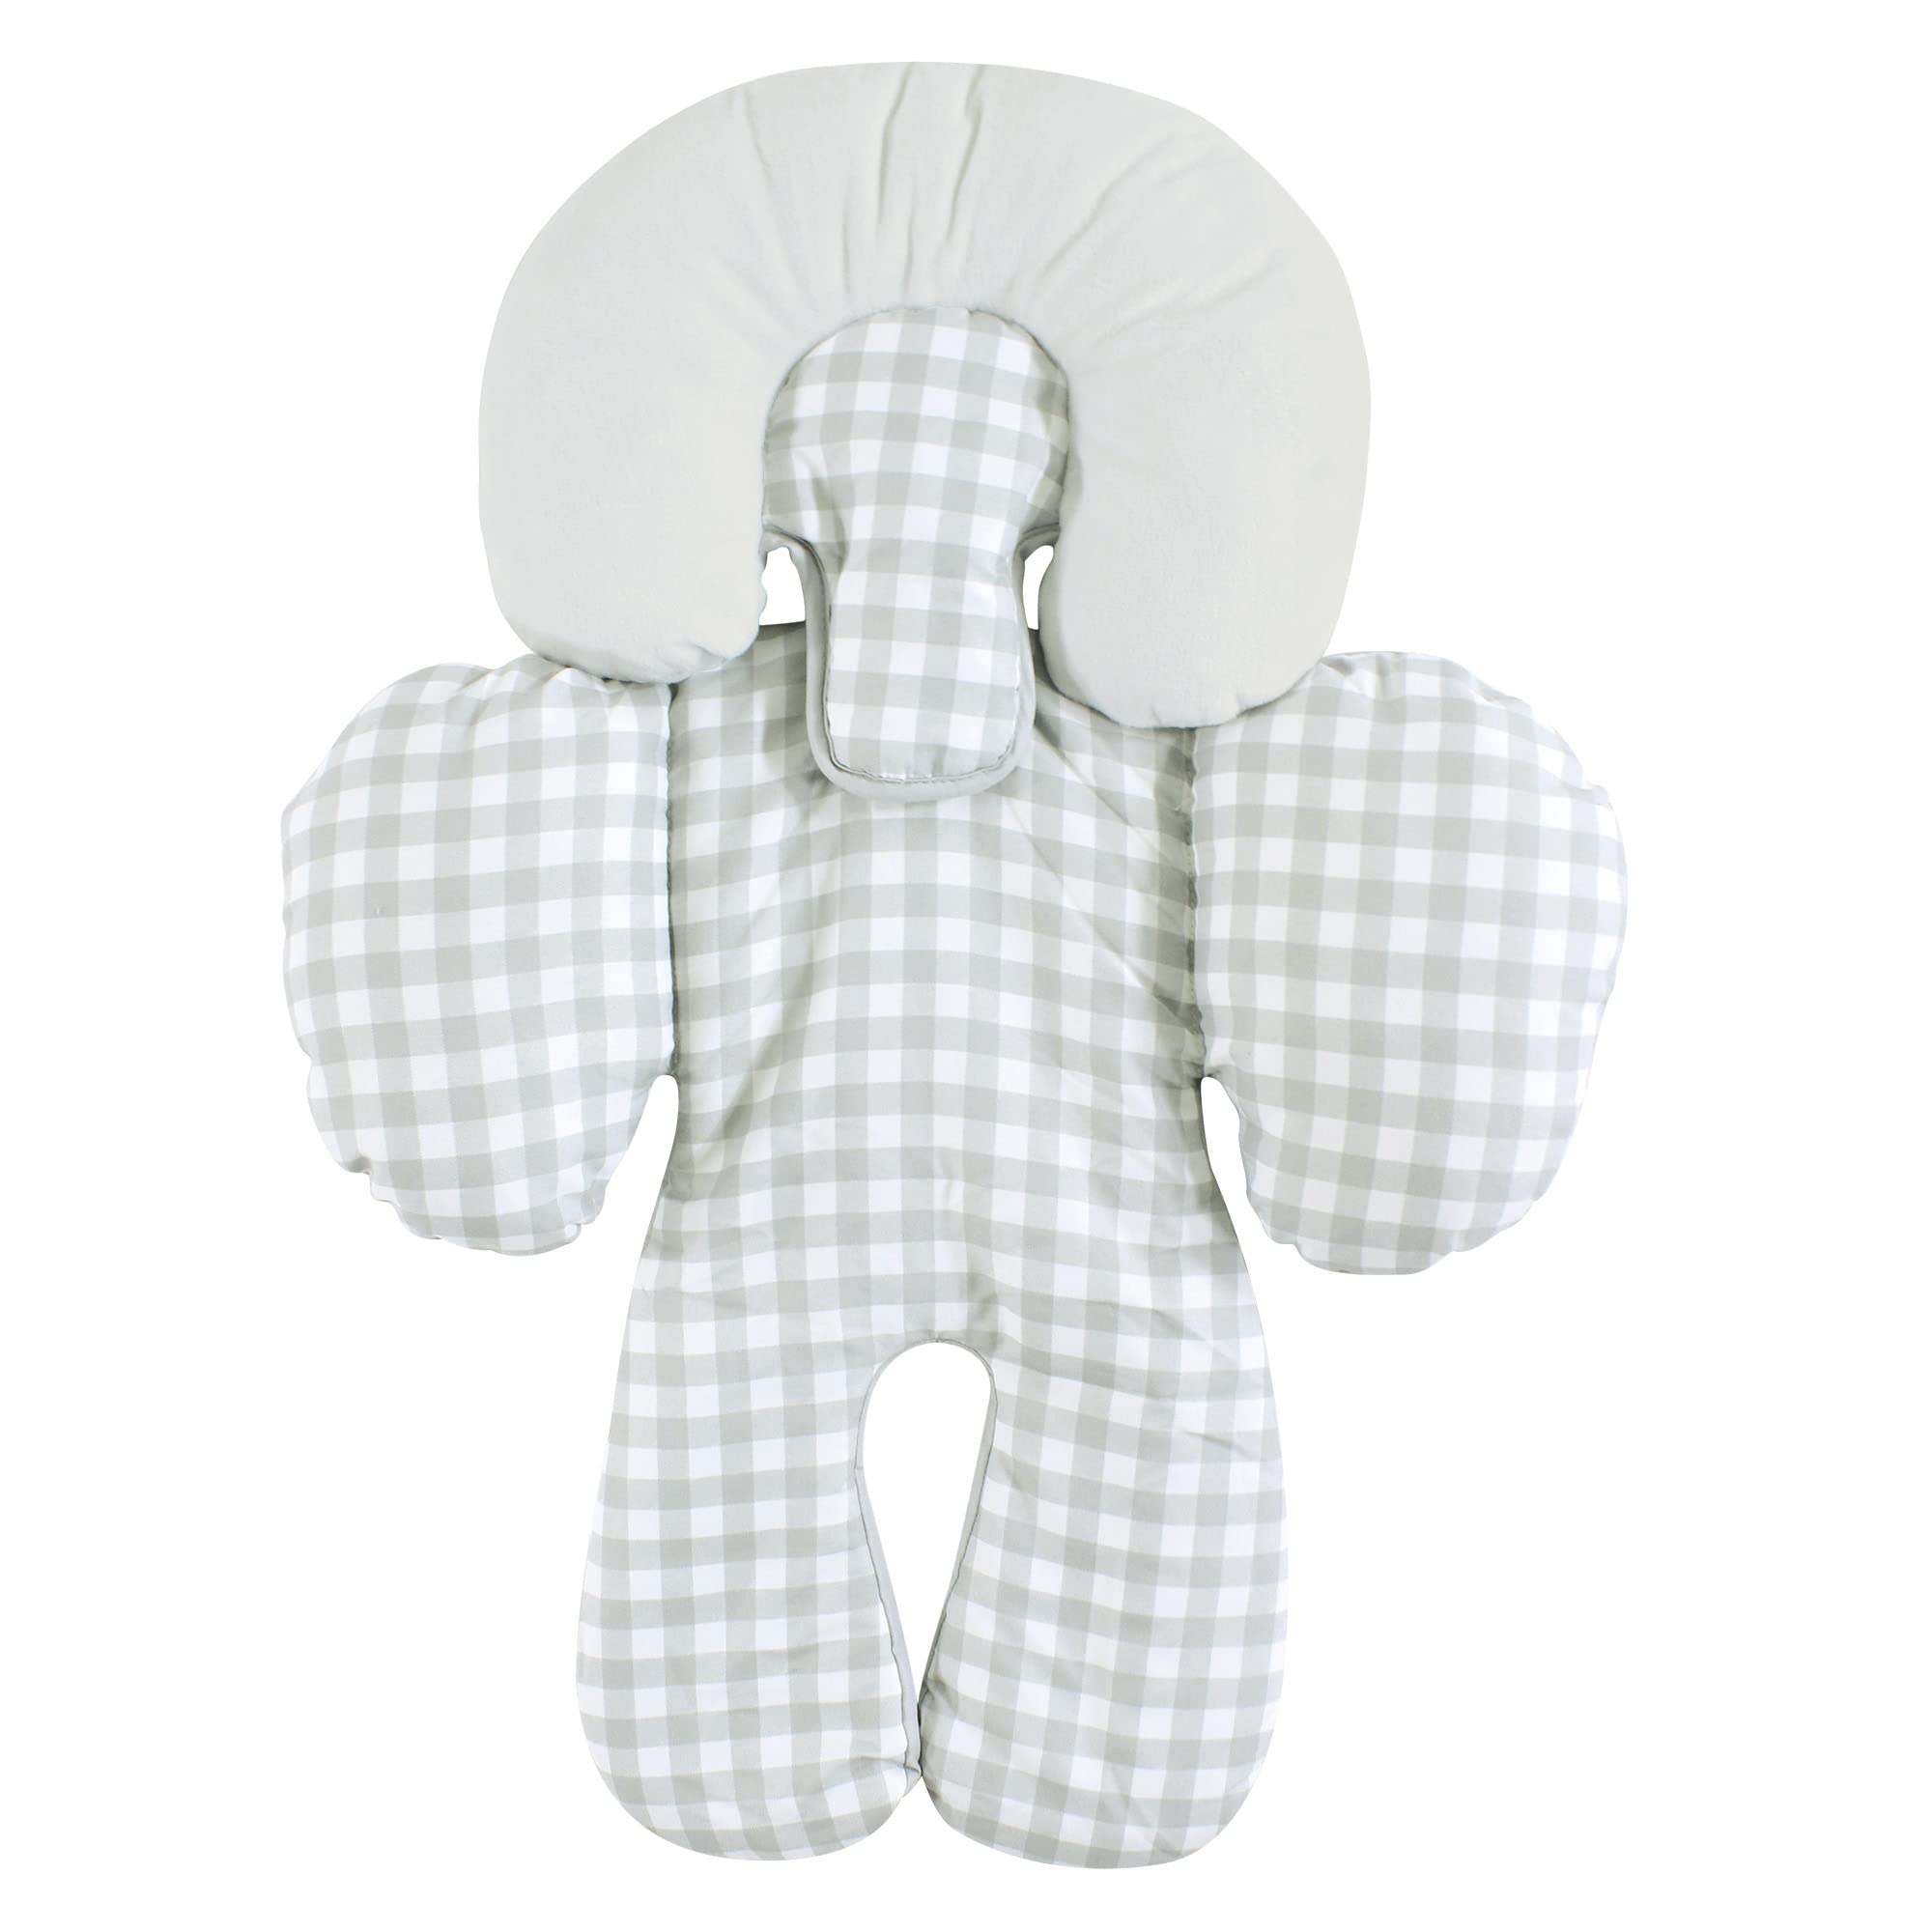 Hudson Baby Unisex Baby Car Seat Body Support Insert, Gray Gingham, One Size